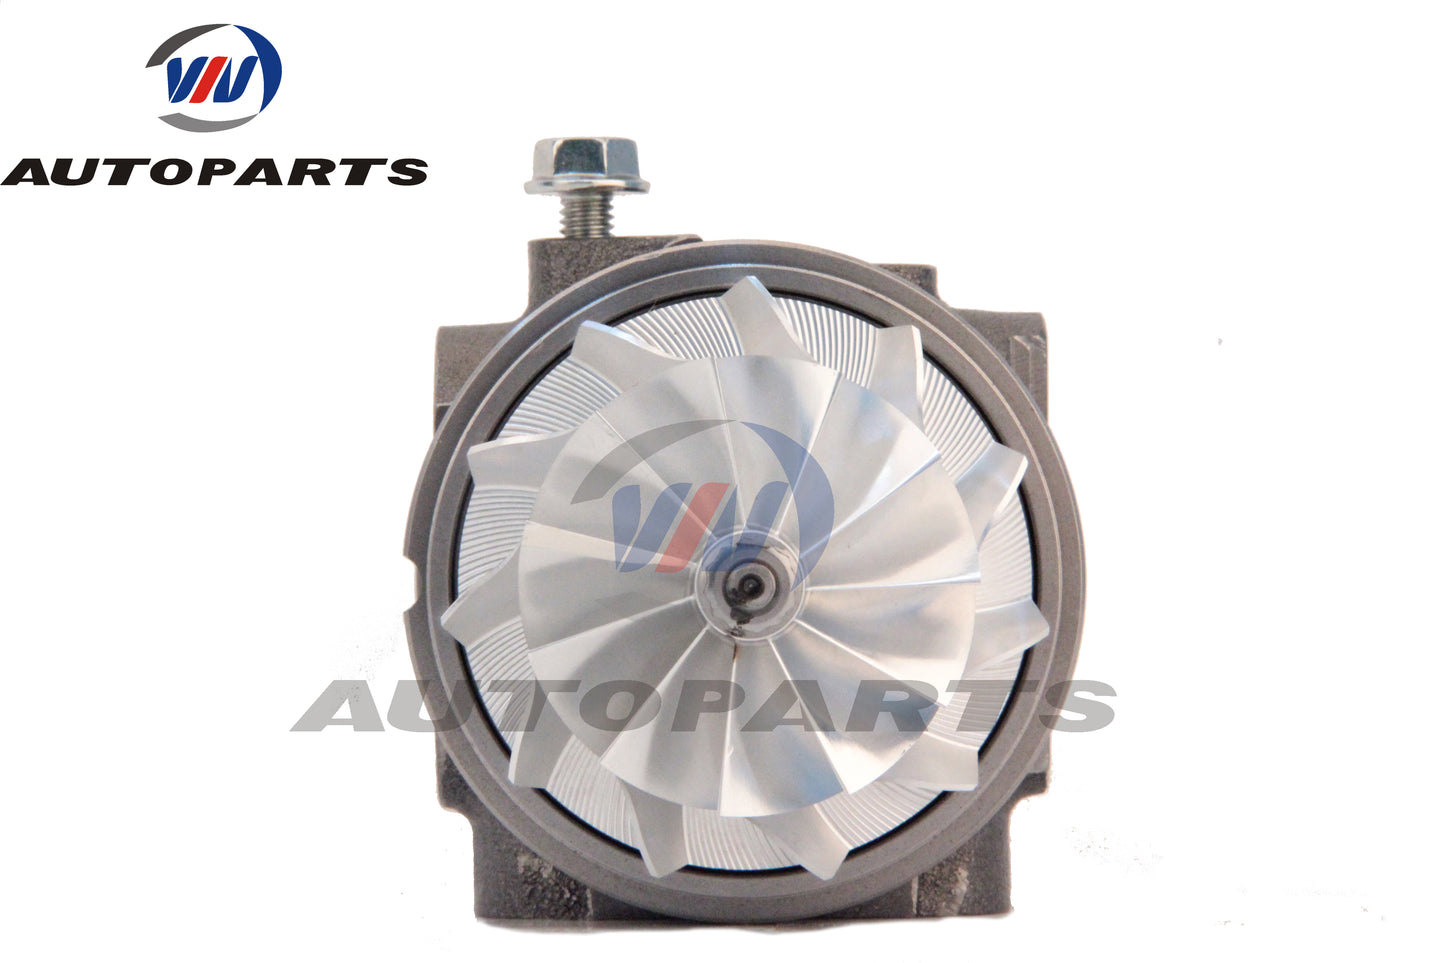 Turbo cartridge chra for BMW 135i 335i 535i Z4 X6 740I 3.0l N54B30 SIZE ENLARGED FOR 17T&19T